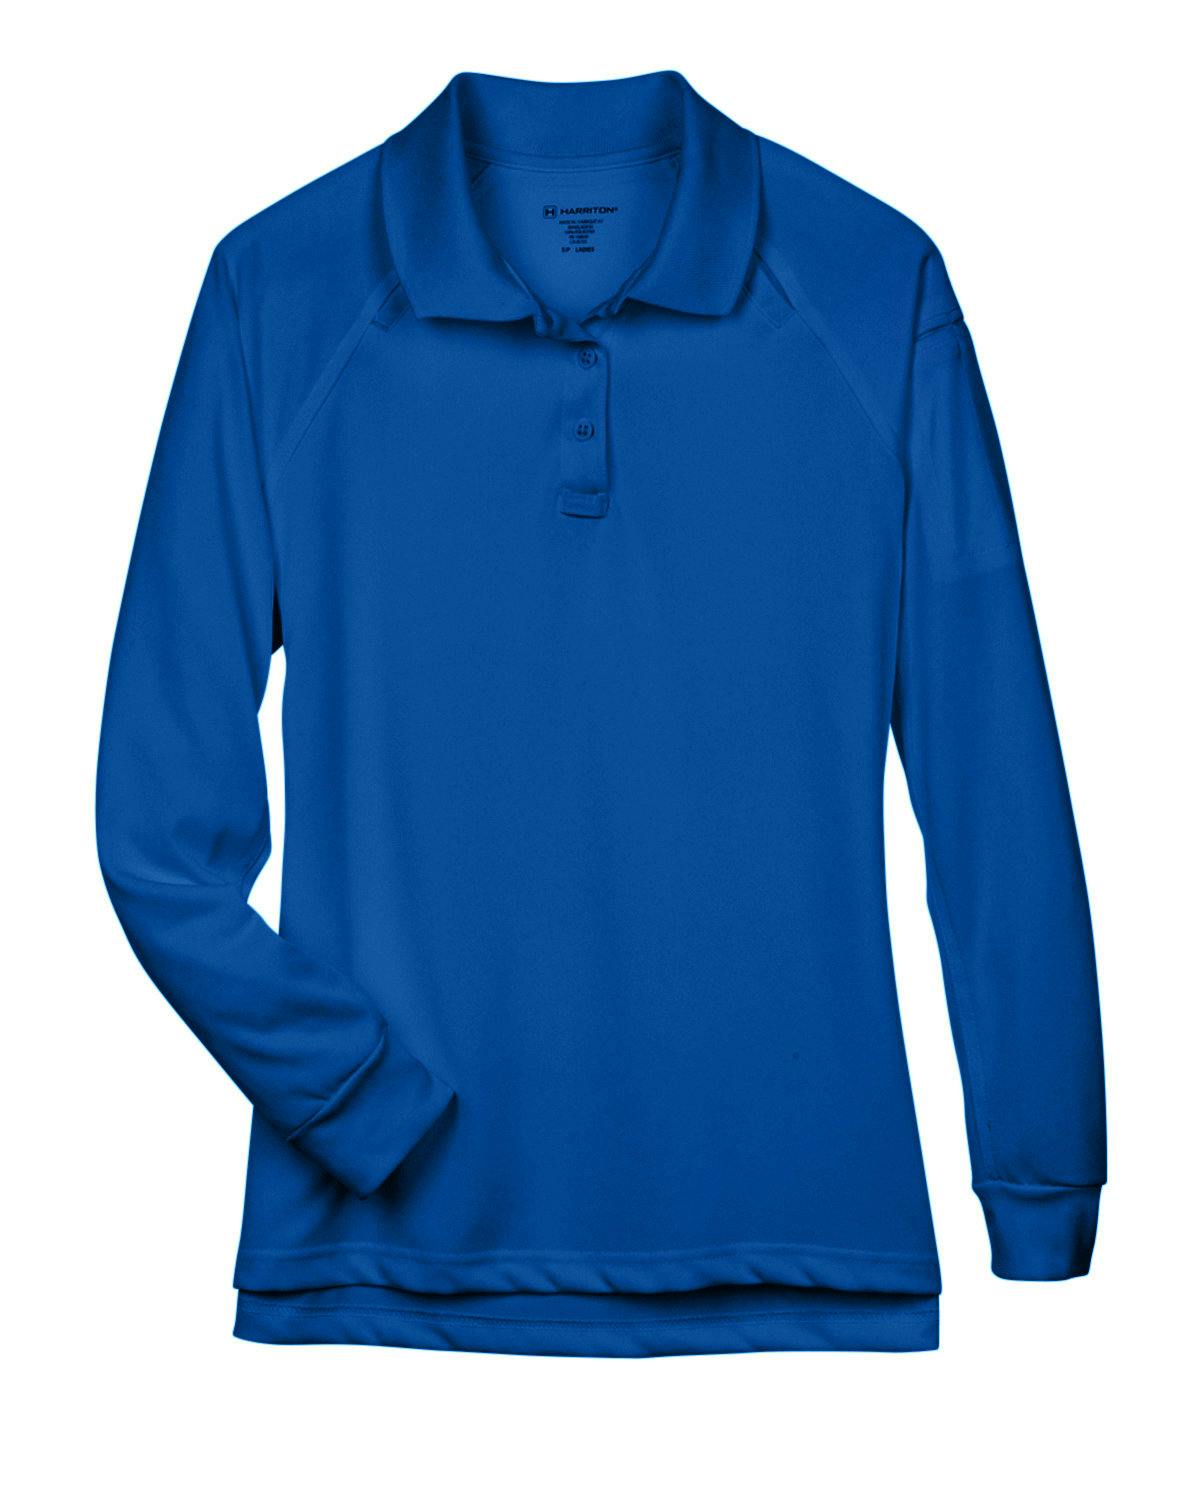 Image for Ladies' Advantage Snag Protection Plus Long-Sleeve Tactical Polo